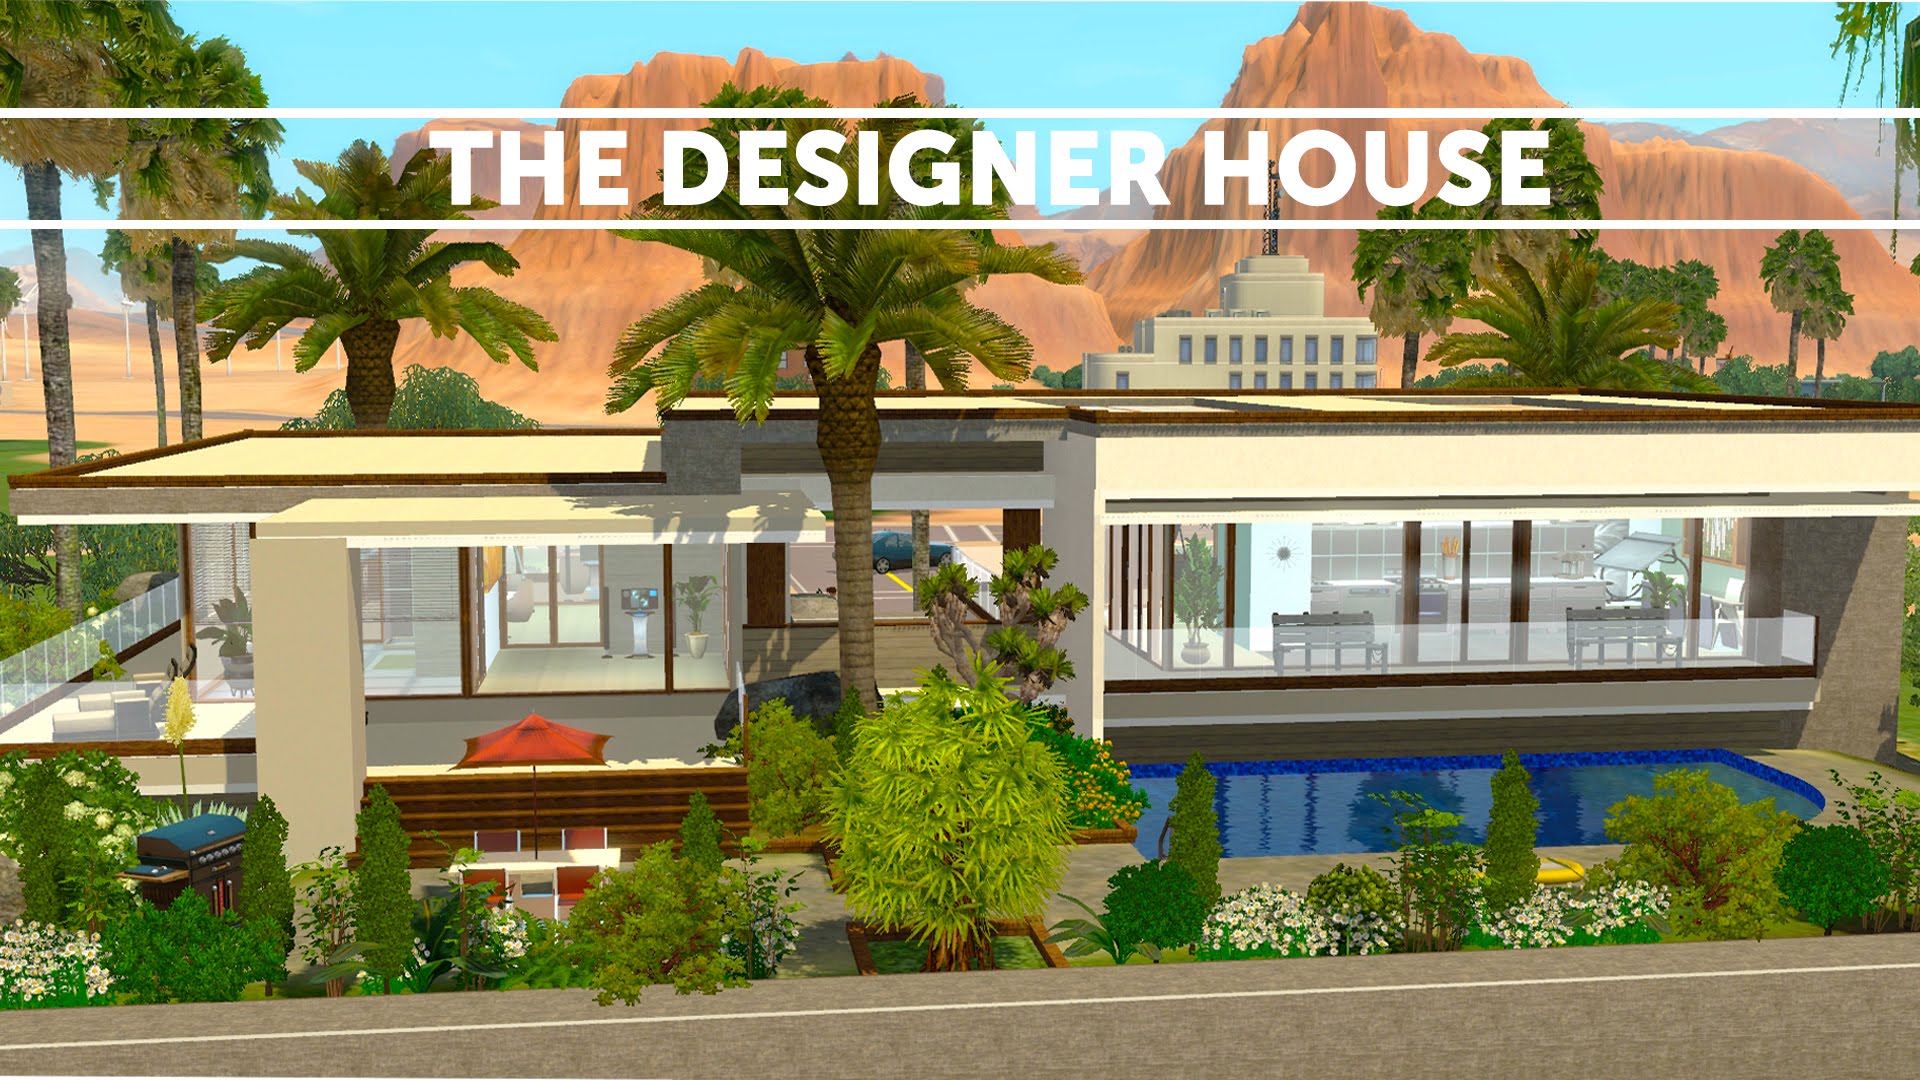 The Sims 3 House Building - The Designer house | Speed build - YouTube